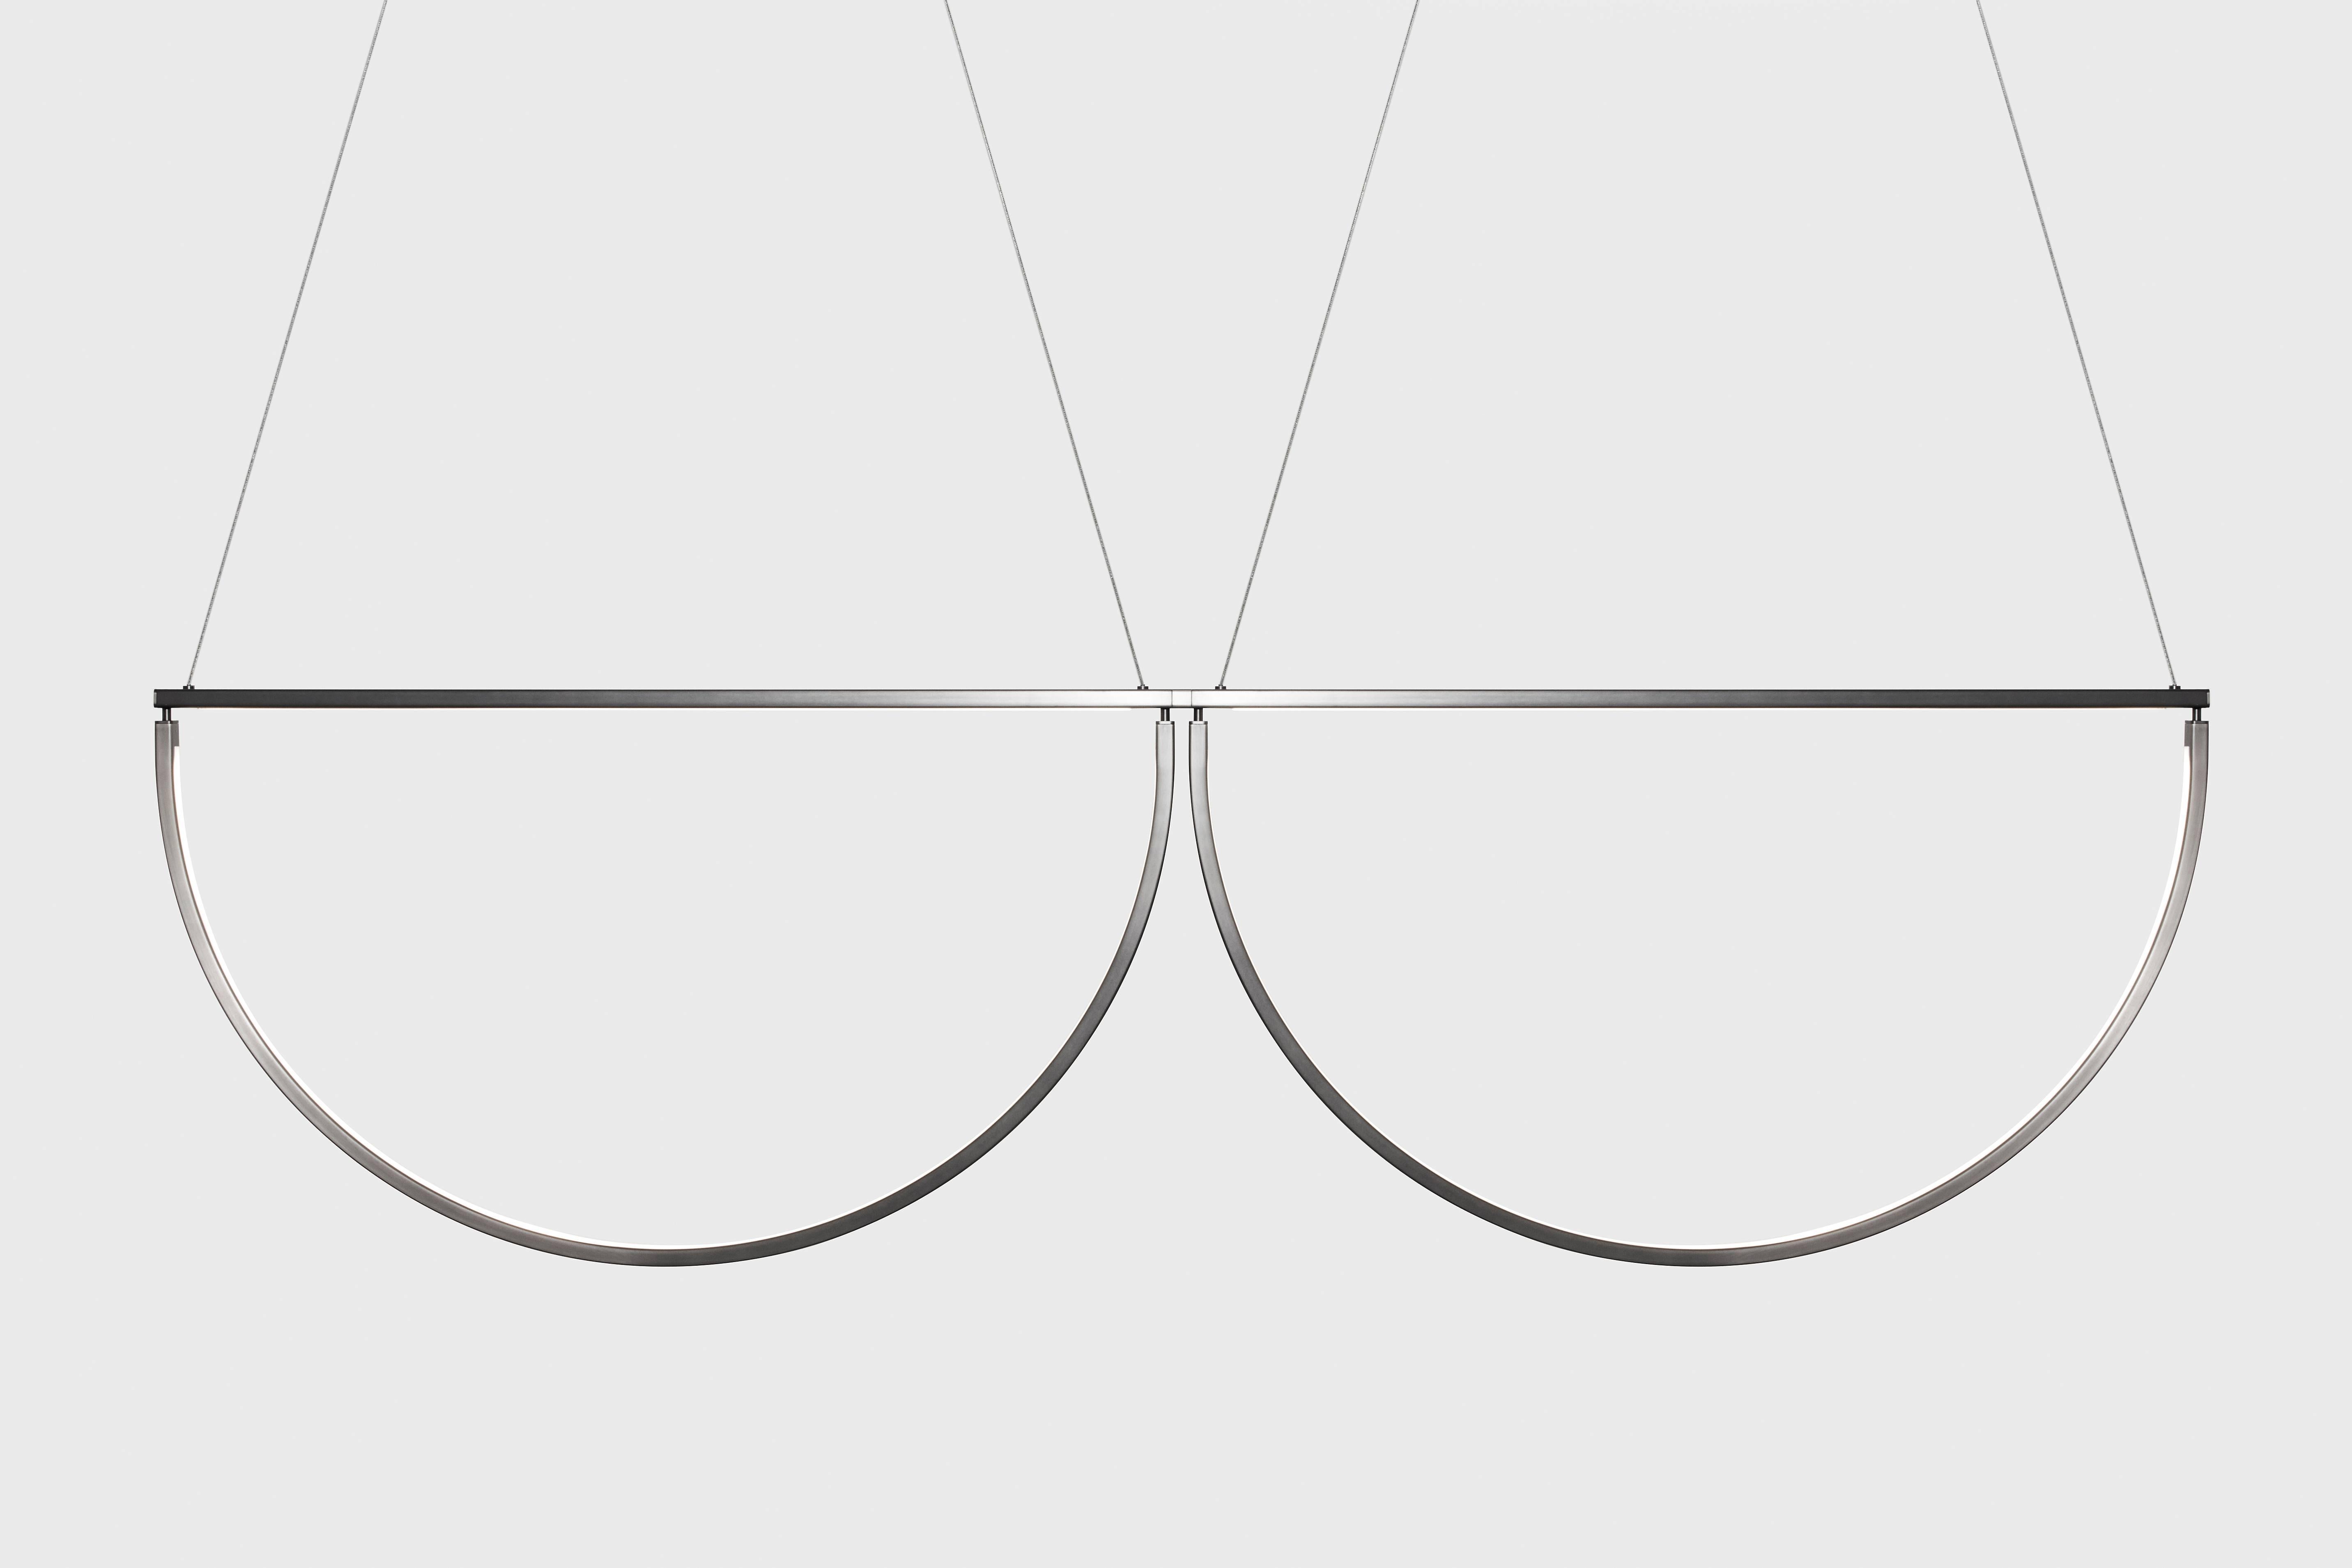 The Chord Convoy, an iterative form of the Chord Pendant, is a playful and elegant linear light. The fixture can exist as a pair of pendants, or be extended to form an endless line in varying sizes or finishes. As the curved steel pieces are grouped